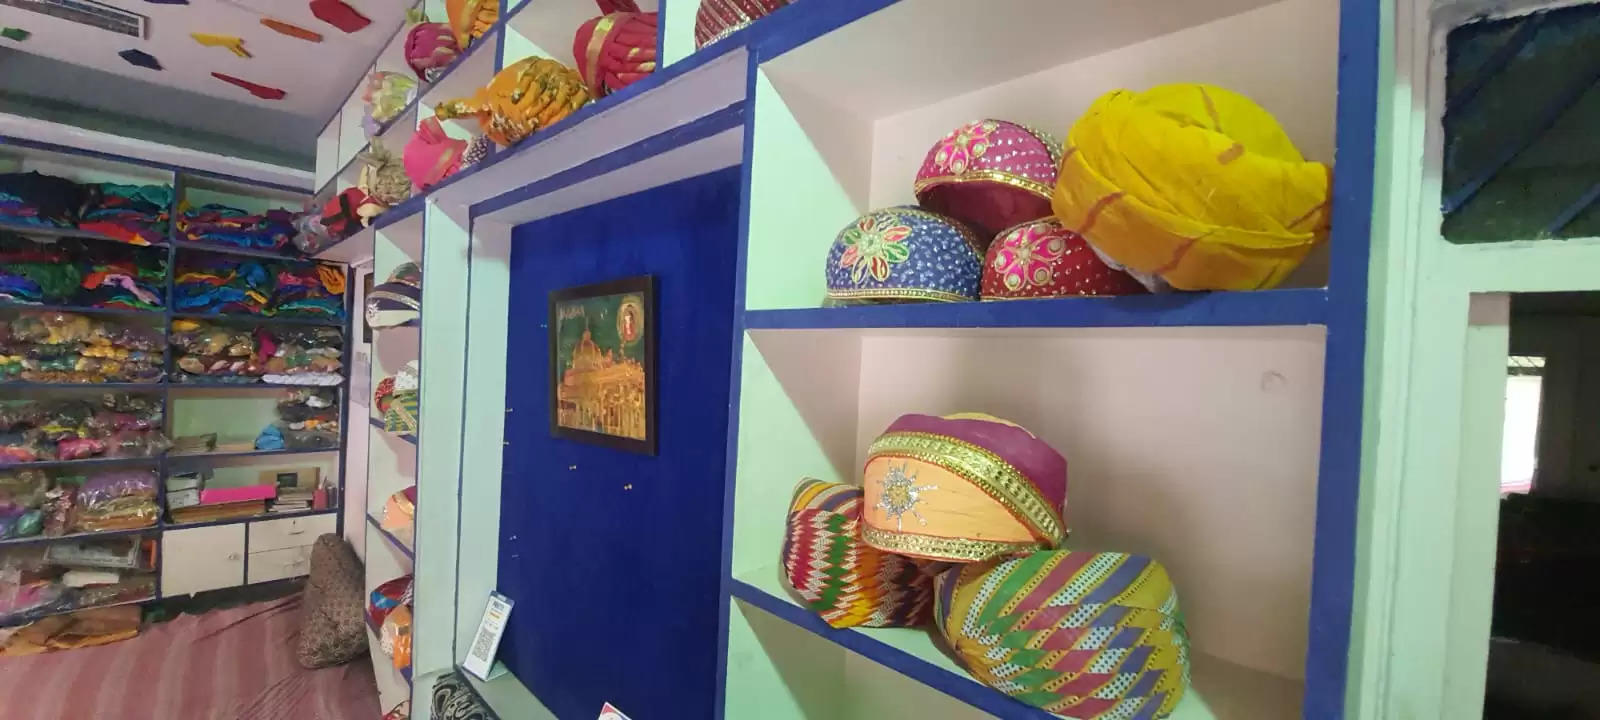 Grip of the garba Where to buy turbans in udaipur, traditional kathiyawadi turbans in udaipur for navratri